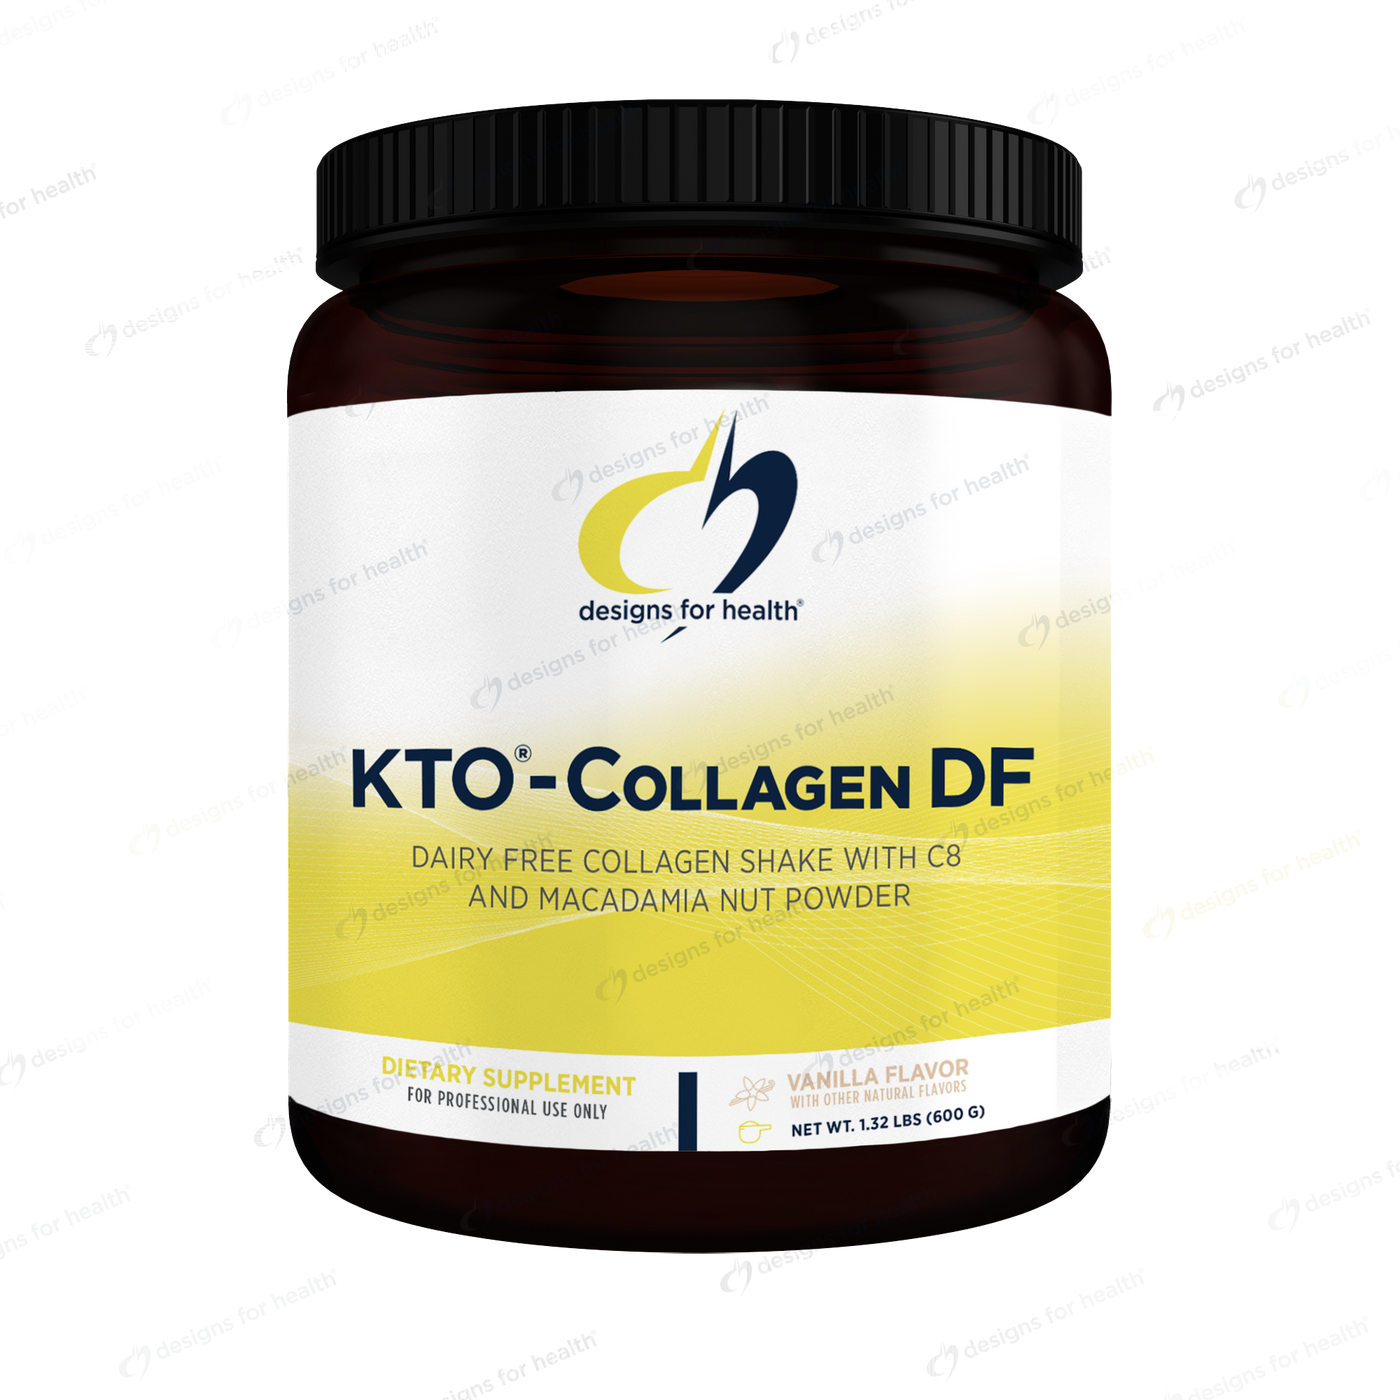 KTO®-Collagen DF ings Curated Wellness